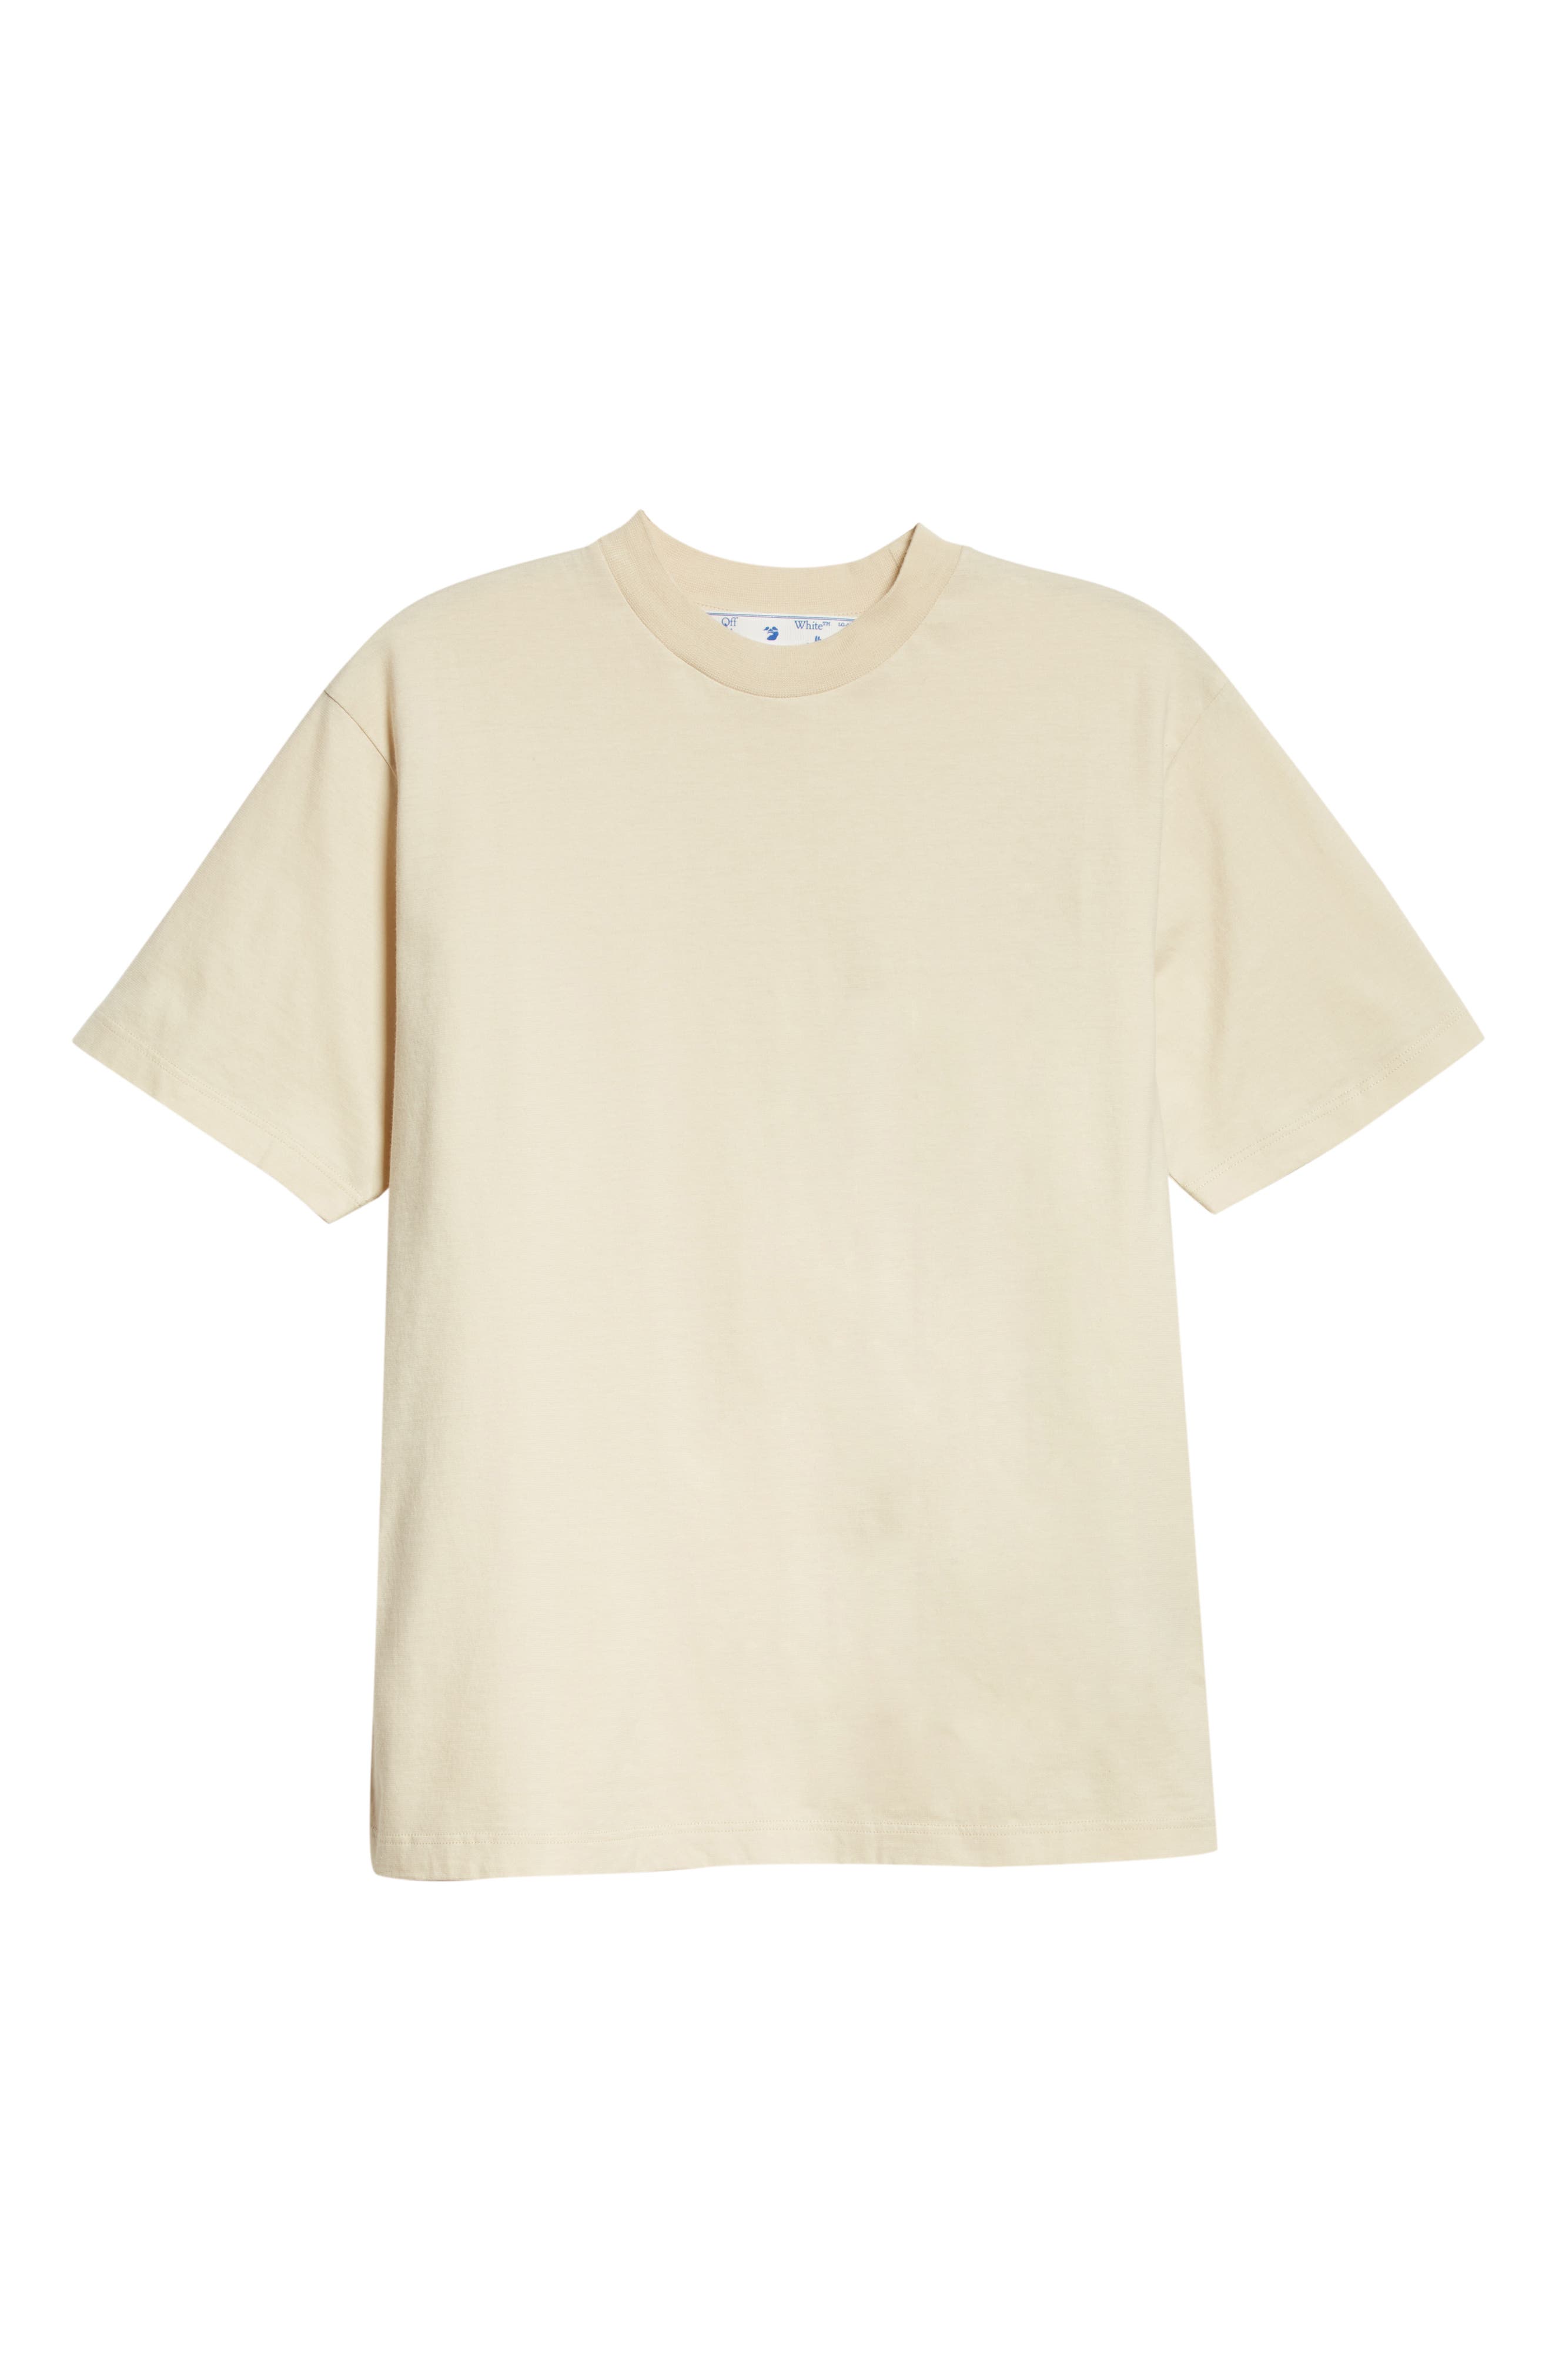 Off-White Diag Organic Cotton Graphic Tee in Beige at Nordstrom